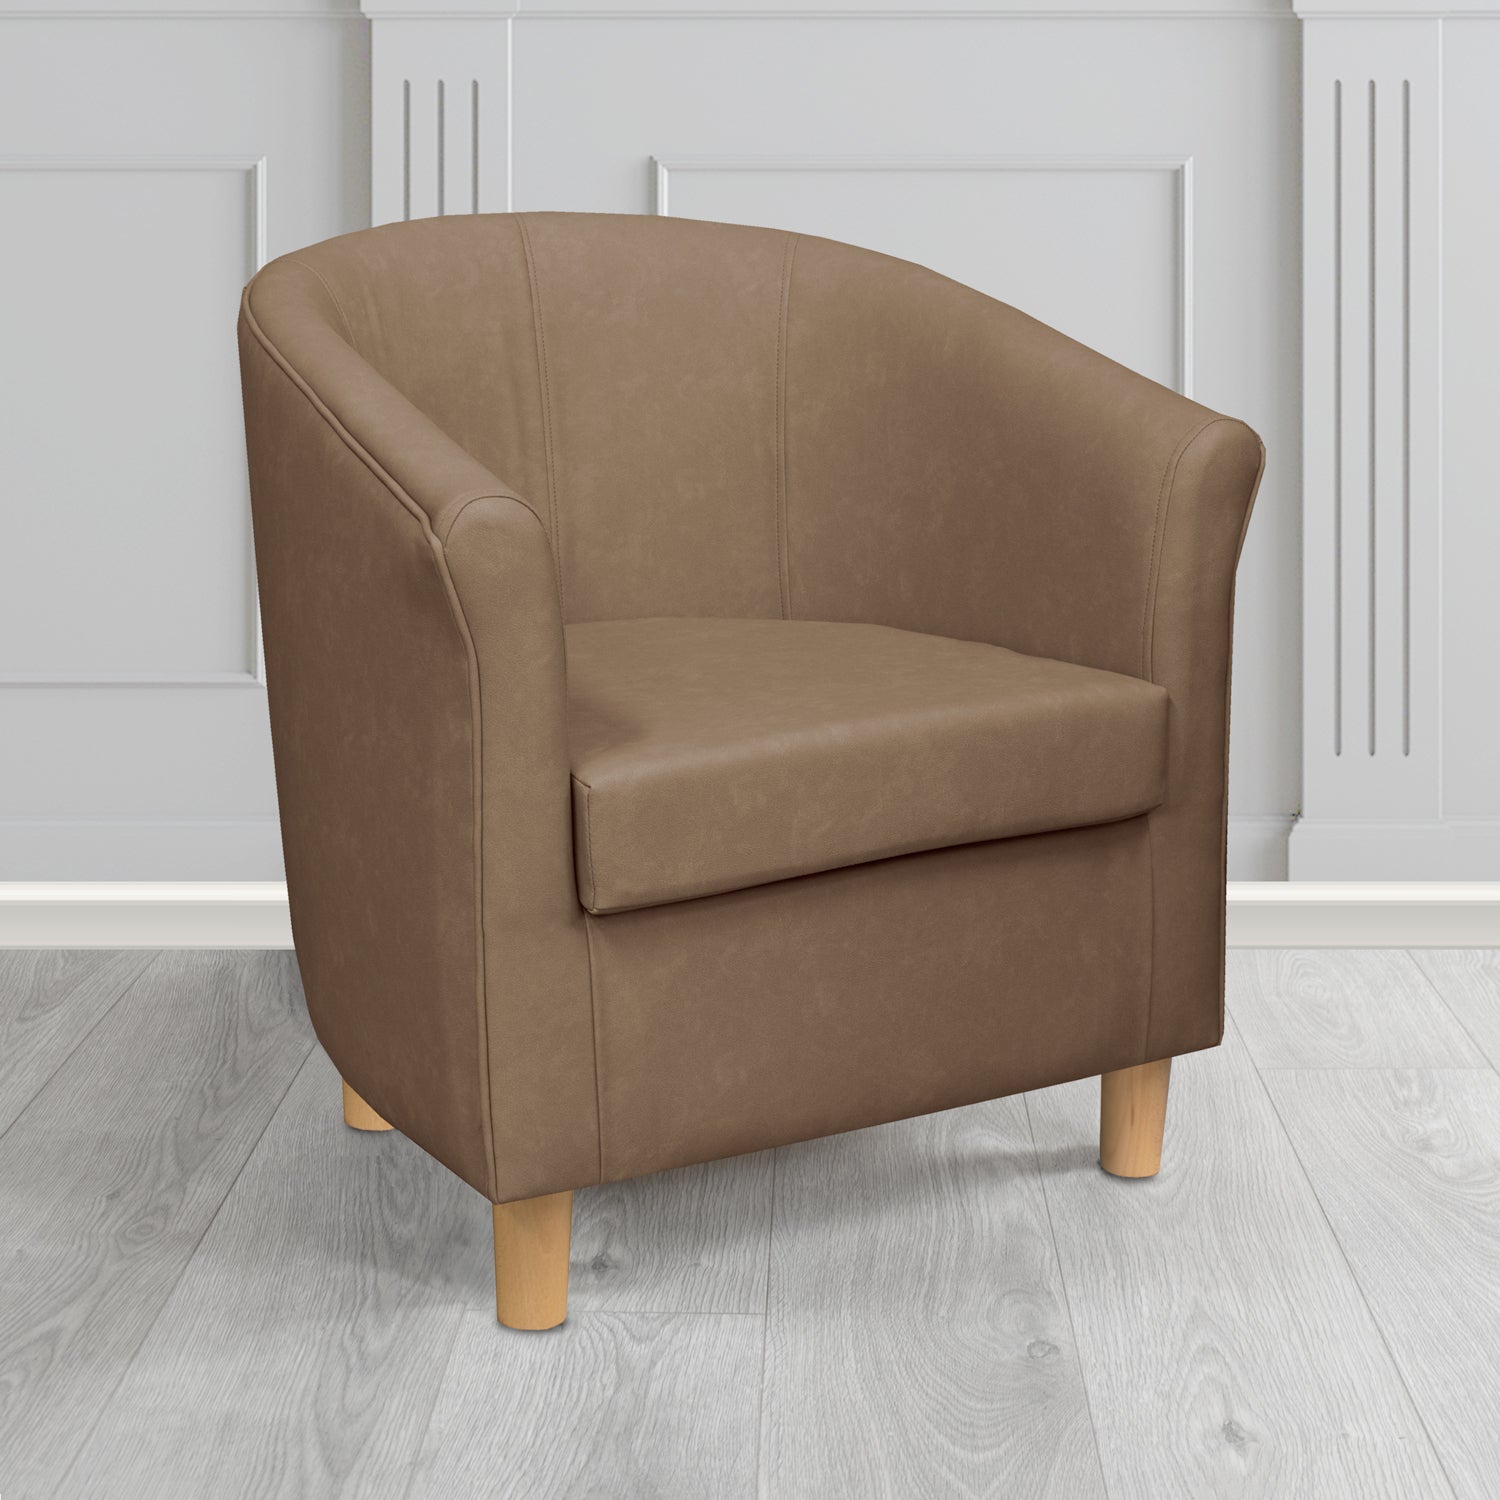 Tuscany Tub Chair in Infiniti Truffle INF1848 Antimicrobial Crib 5 Faux Leather - The Tub Chair Shop